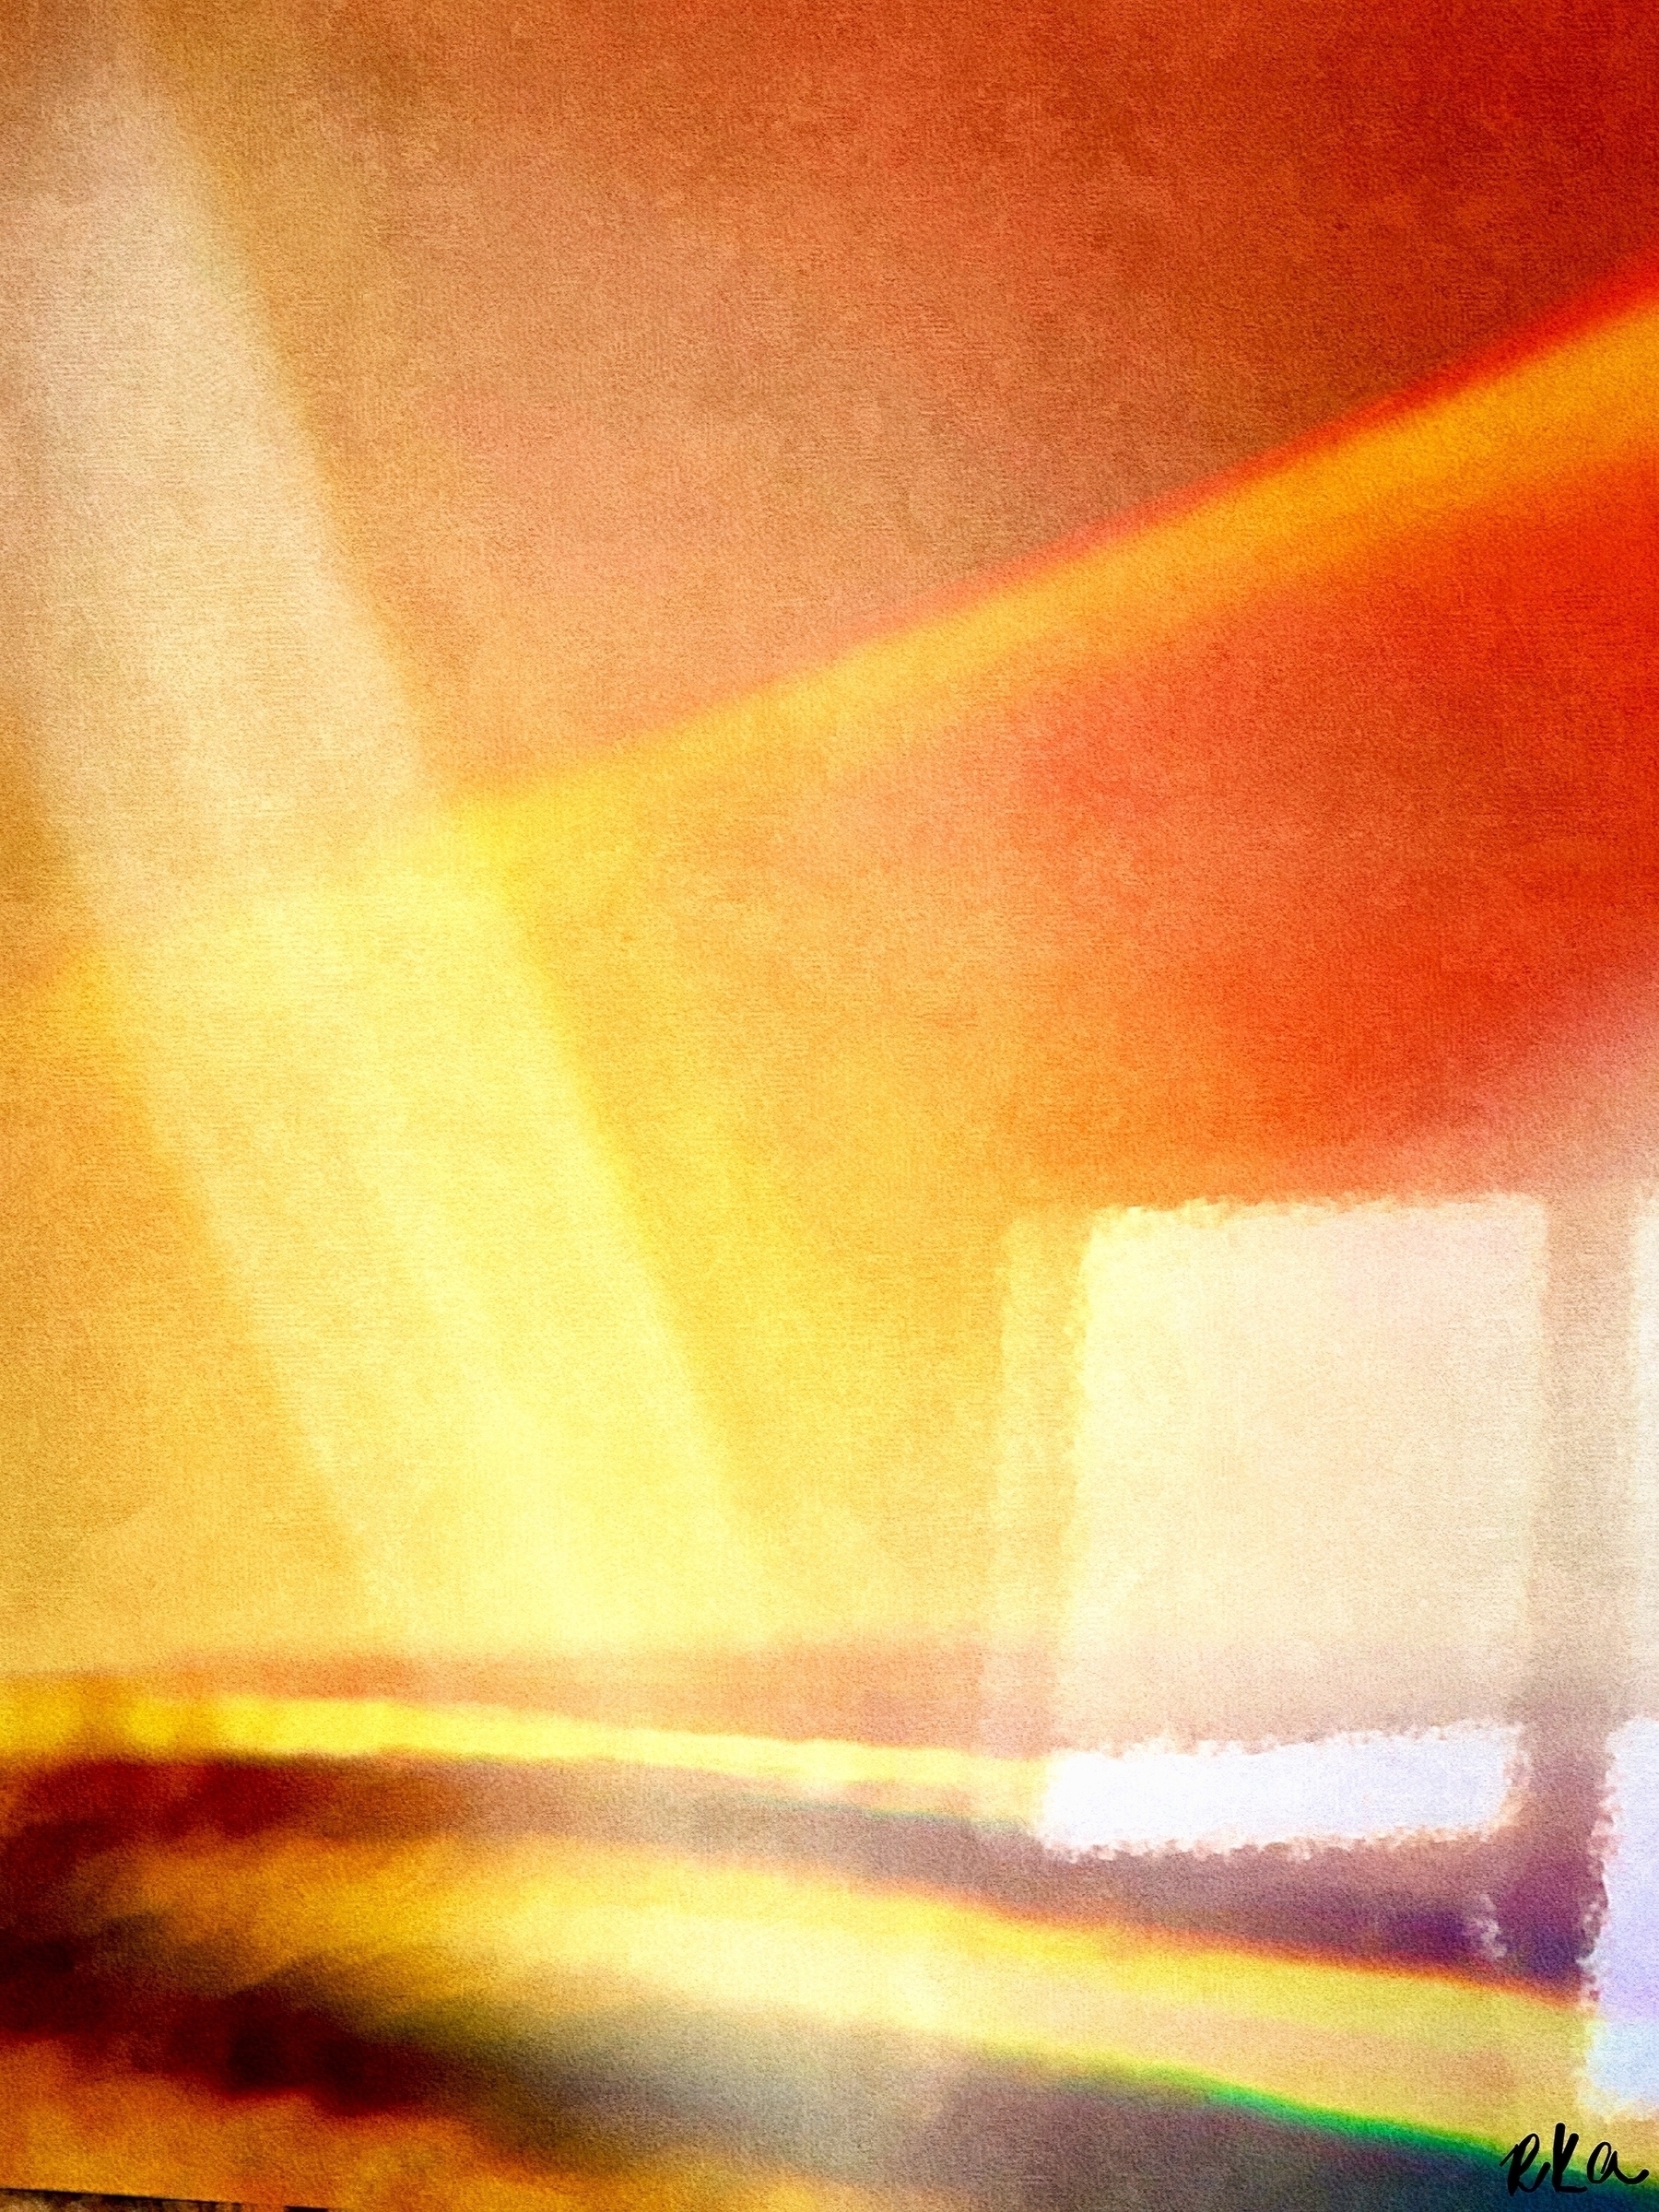 Abstract representation of the view from a train window, accentuating the reds and orange hues of the sunlight